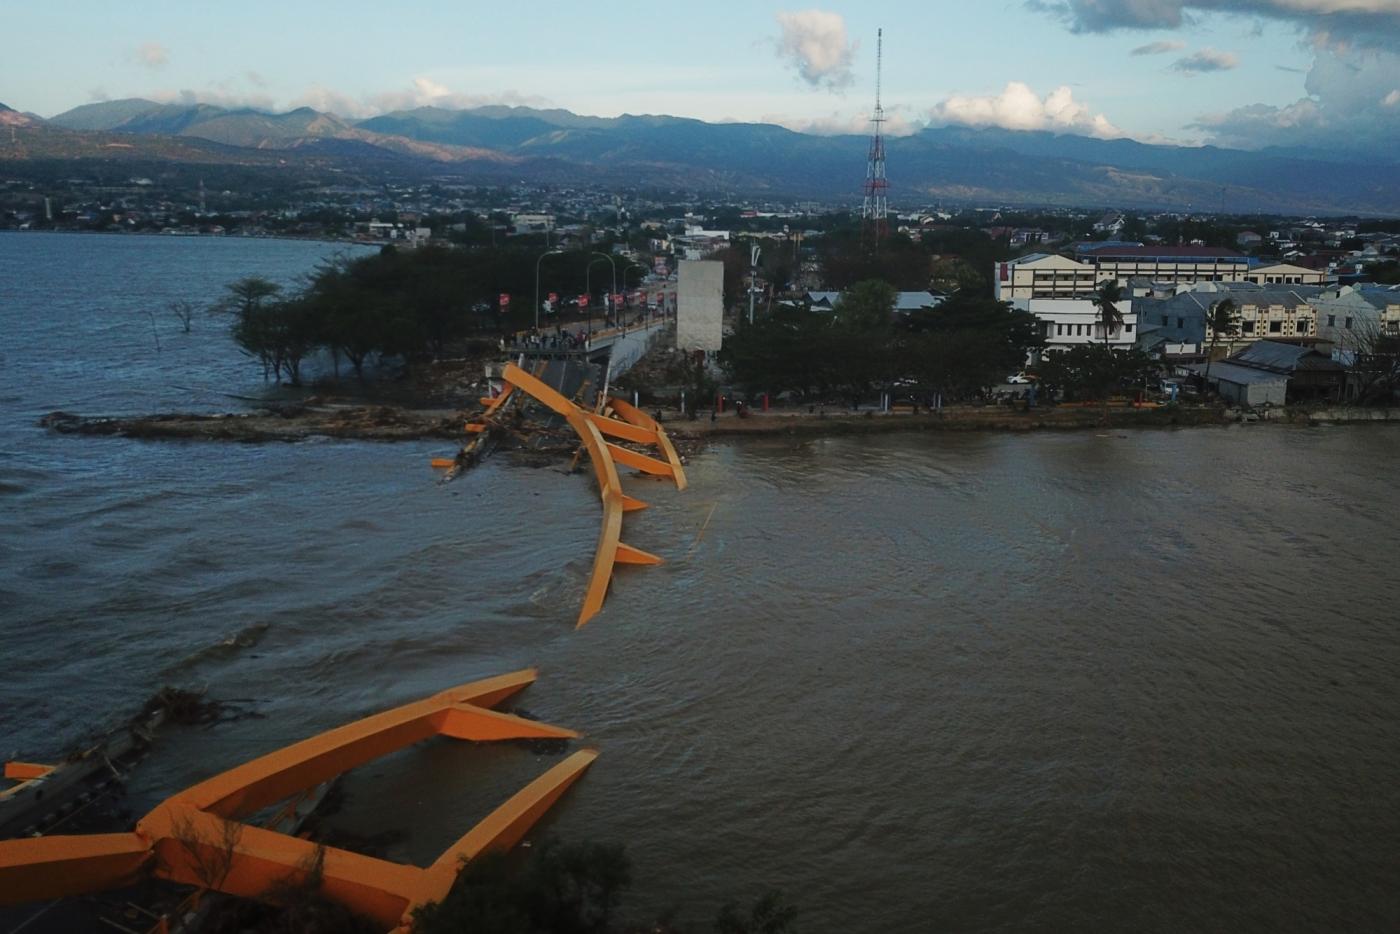 PALU, Oct. 8, 2018 (Xinhua) -- Photo taken on Oct. 8, 2018 shows the aerial view of a collapsed bridge after the earthquake and tsunami in Palu, Central Sulawesi, Indonesia. Death toll from multiple powerful quakes and an ensuing tsunami striking Central Sulawesi province of Indonesia on September 28 jumped to 1,948 on Monday and more than 5,000 others went missing, according to a disaster agency official here. (Xinhua/Wang Shen/IANS) by .